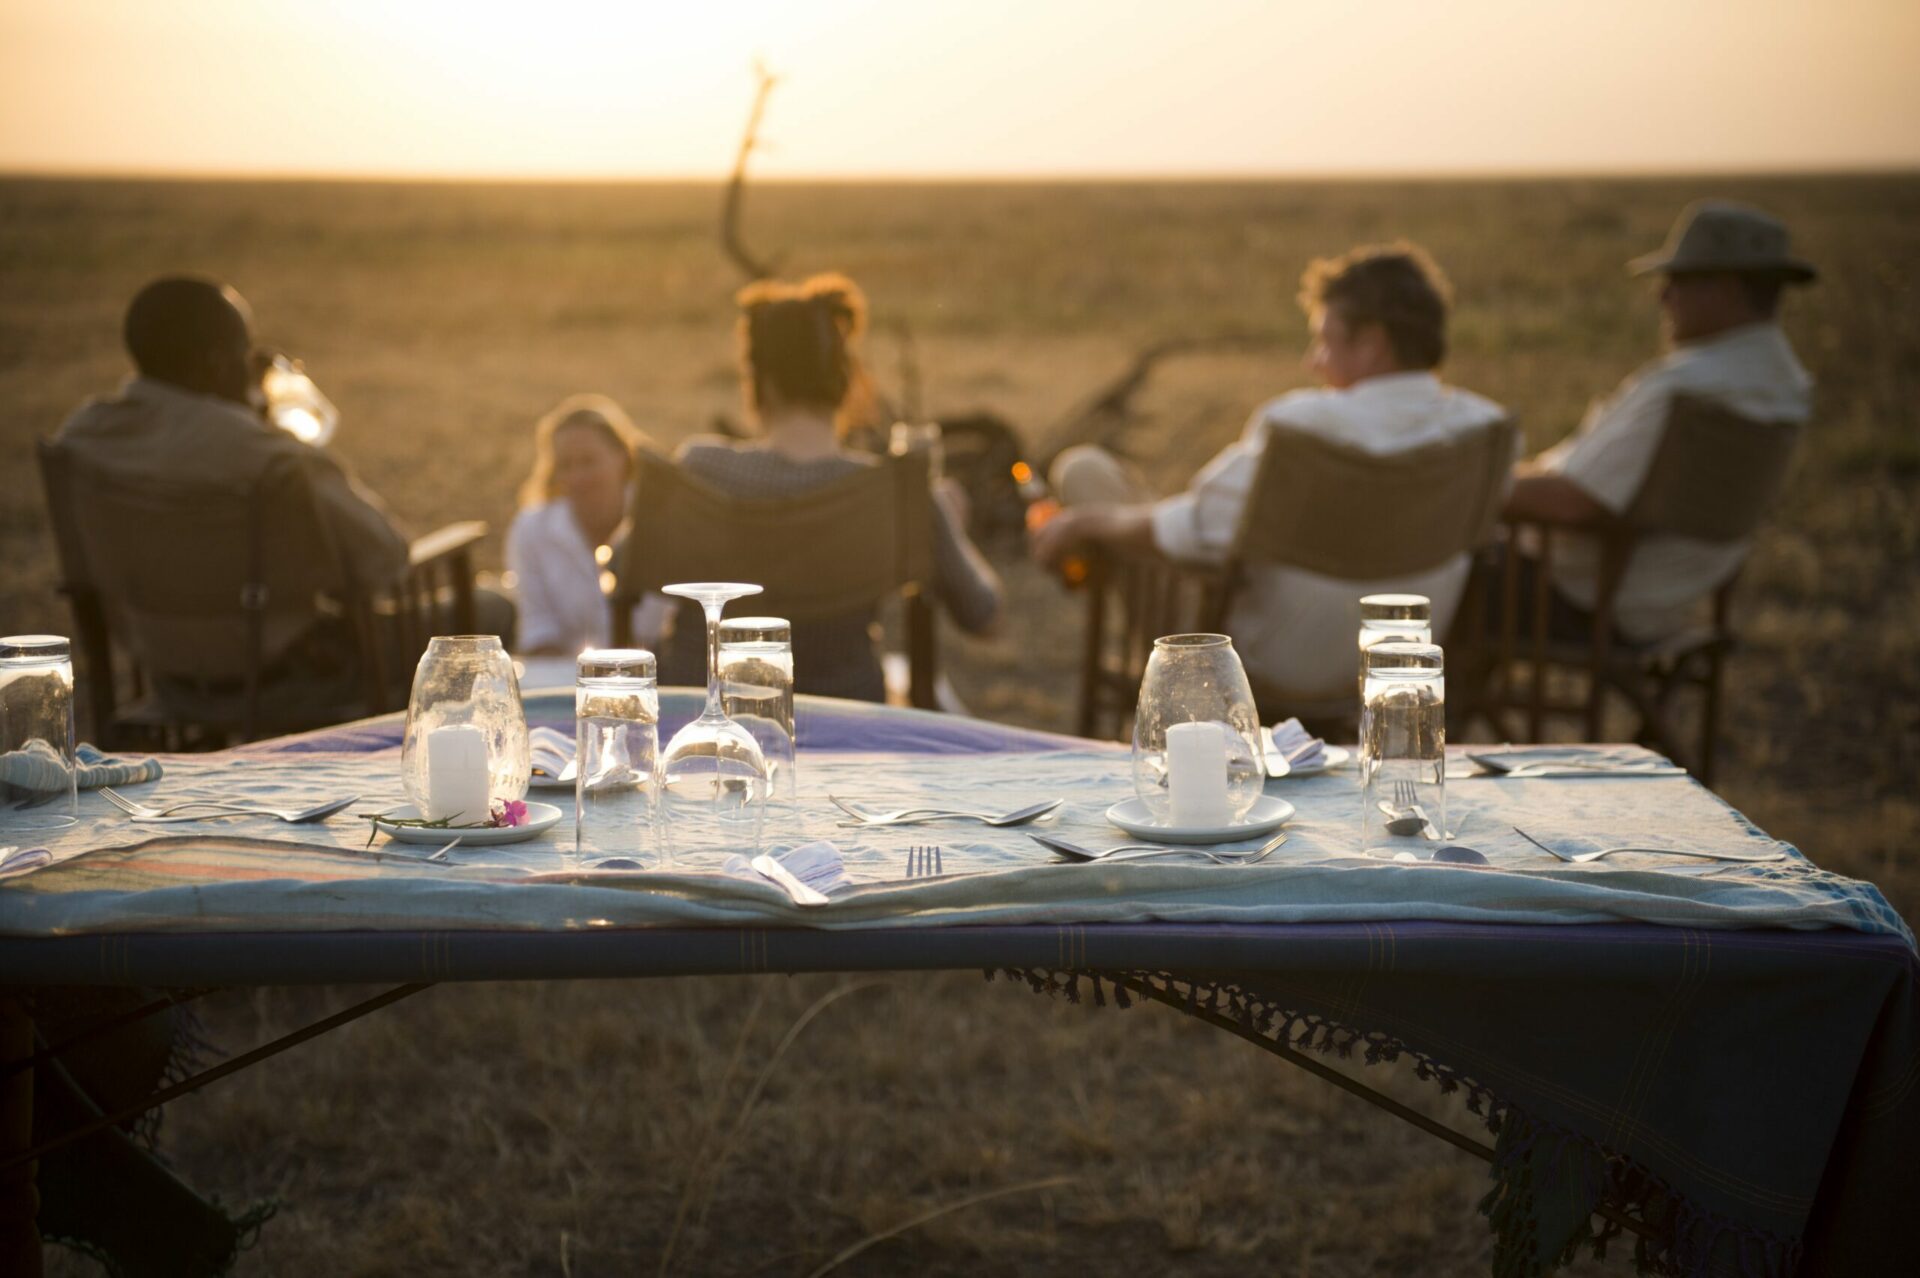 table set up outside with guests sitting in chairs looking out onto the open plains at sunset